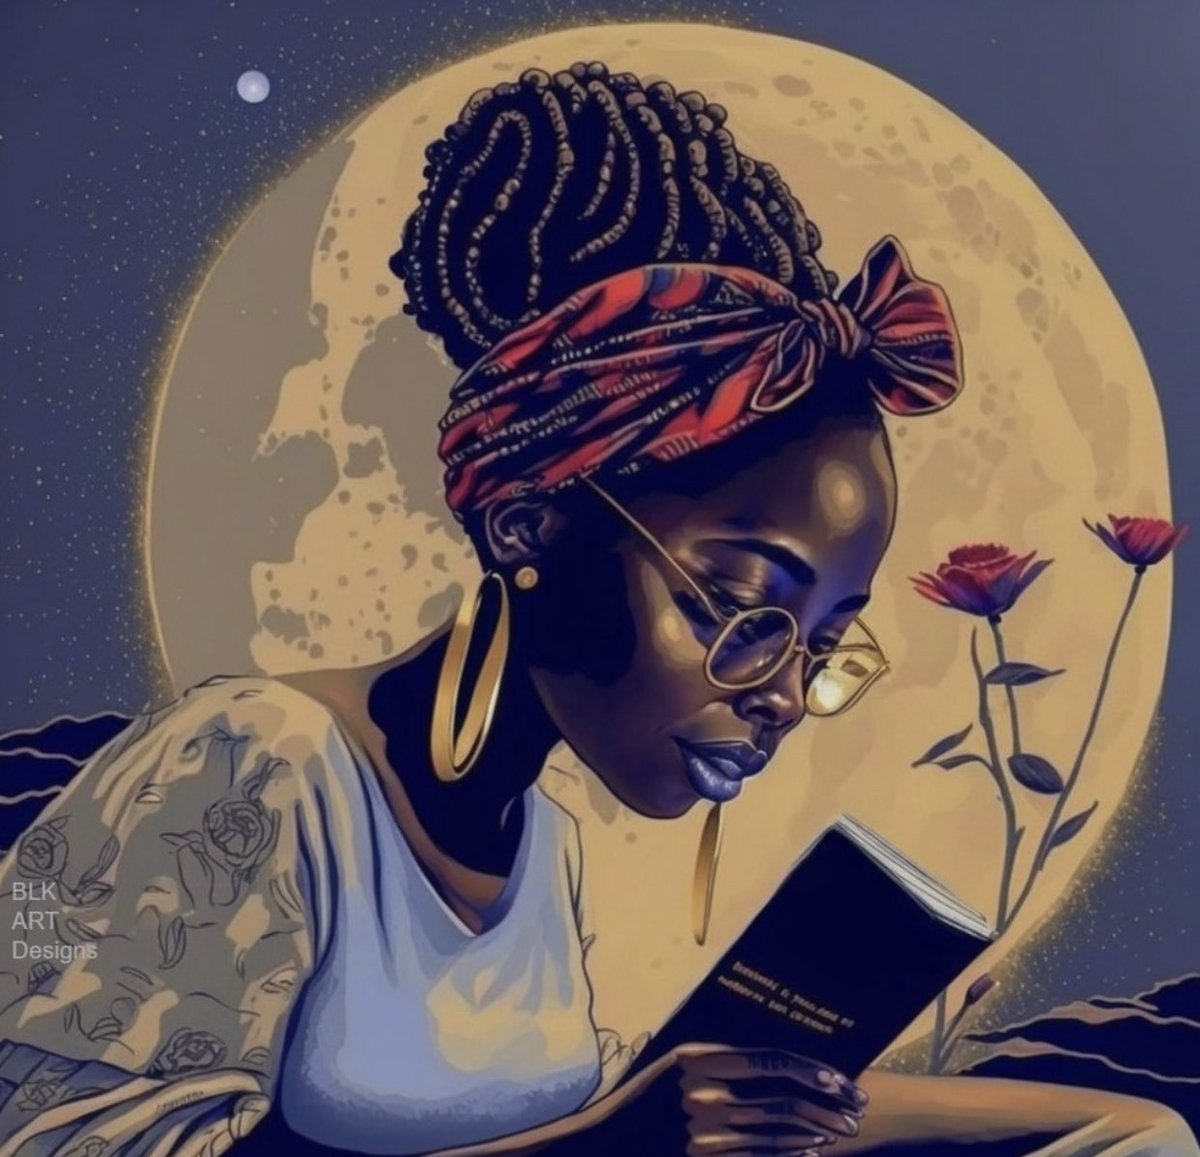 Maybe this is why we read, and why in moments of darkness we return to books: to find words for what we already know.

🎨; @blkartdesigns 

#art #painting #paintings #culture #rizzulenation #rizzulenationart #rwandaculture #afroculture #africa #media #africanpainting